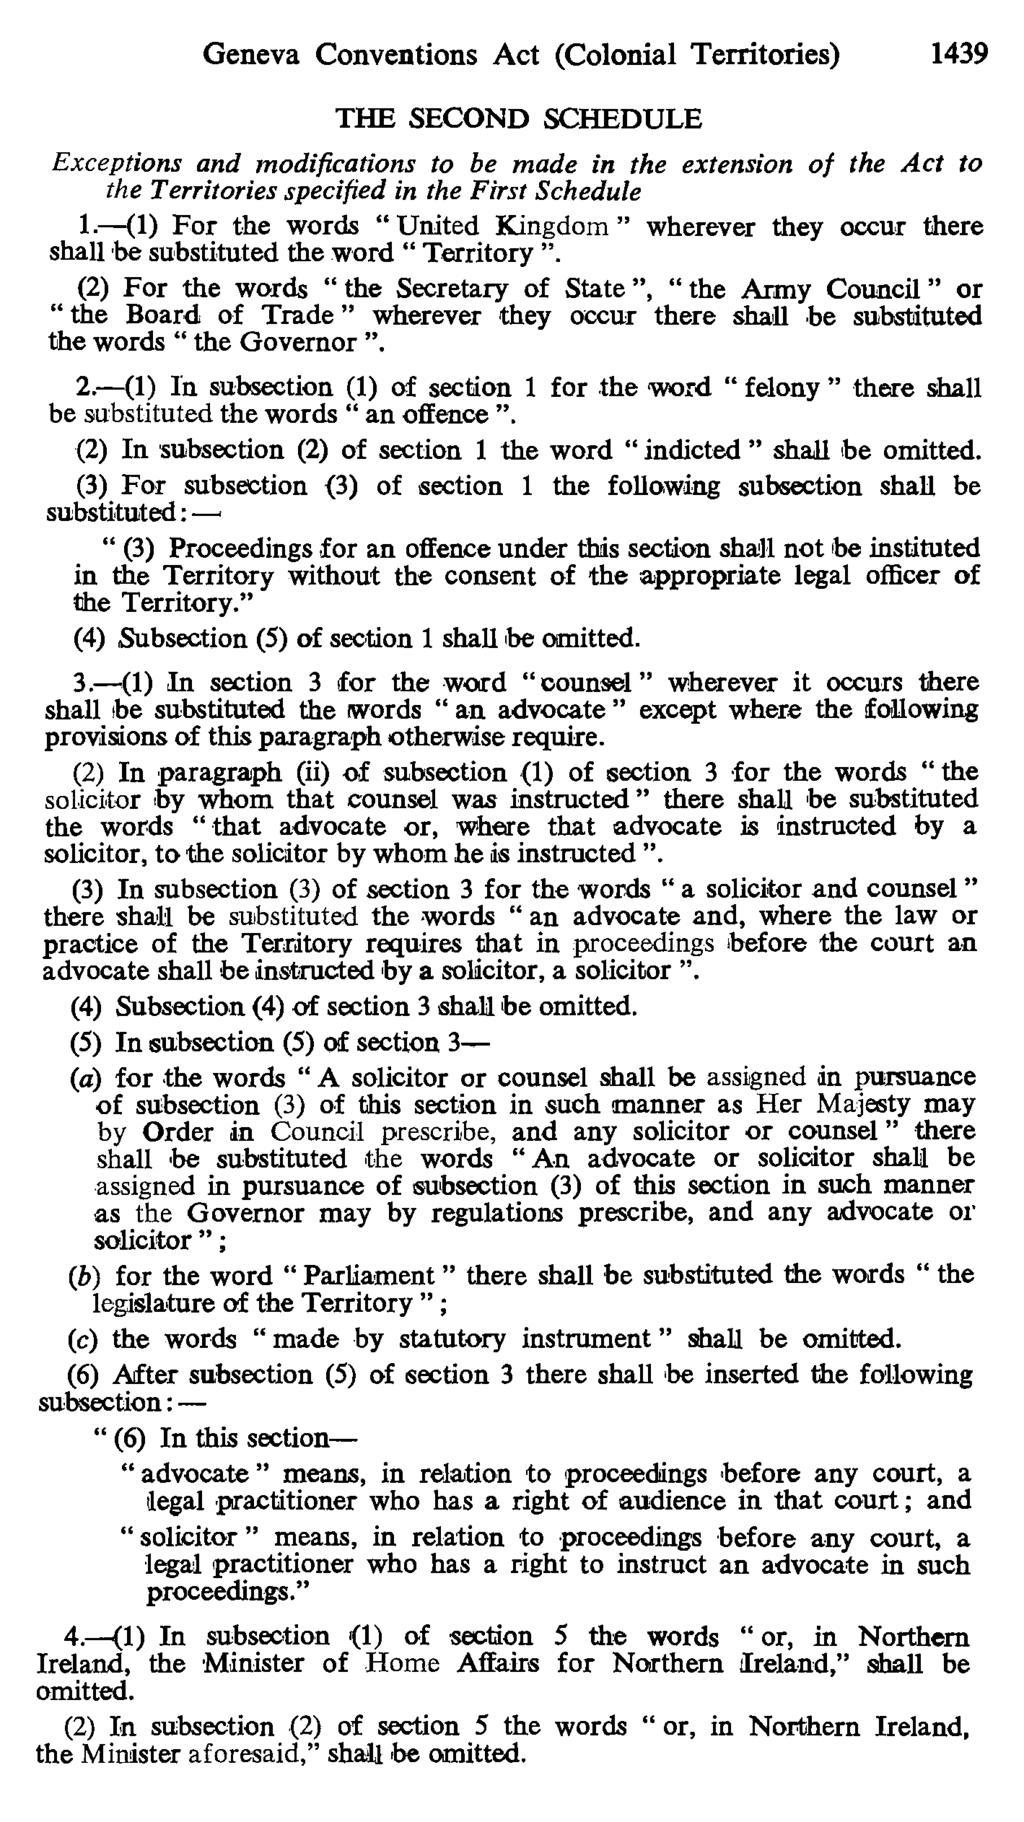 Geneva Conventions Act (Colonial Territories) 1439 THE SECOND SCHEDULE Exceptions and modifications to be made in the extension of the Act to the Territories specified in the First Schedule 1.